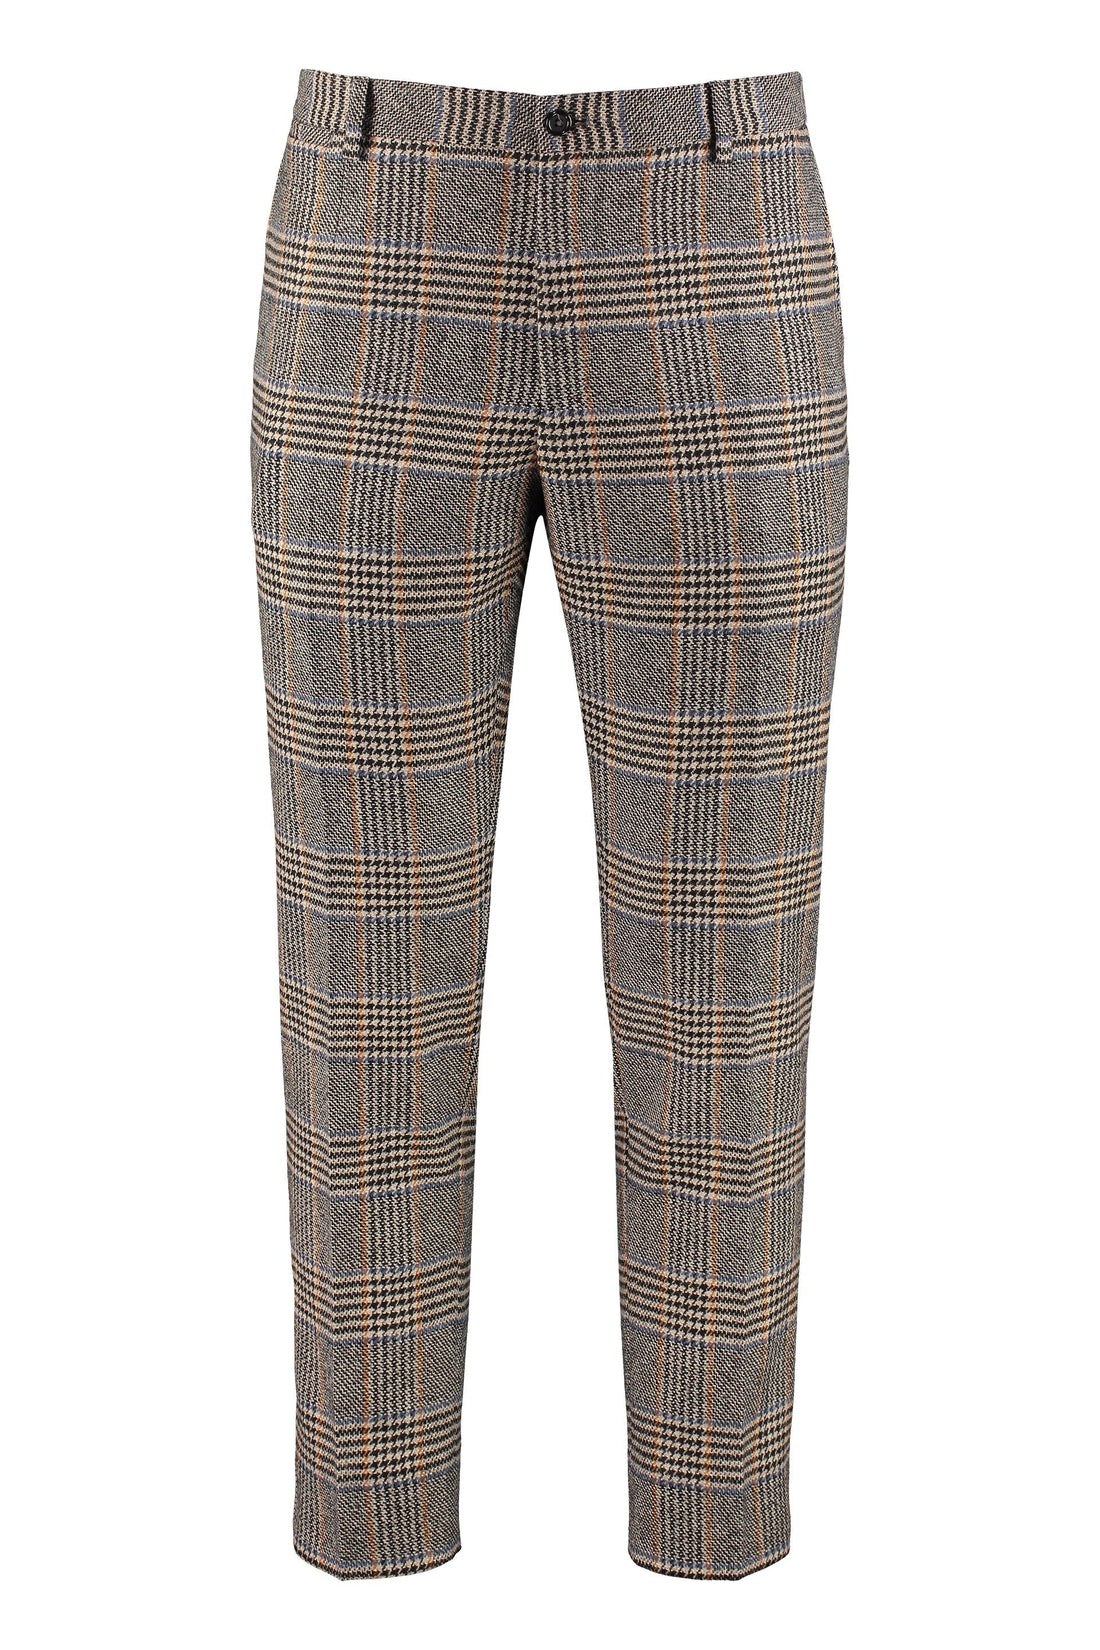 Dolce & Gabbana-OUTLET-SALE-Prince of Wales check wool trousers-ARCHIVIST